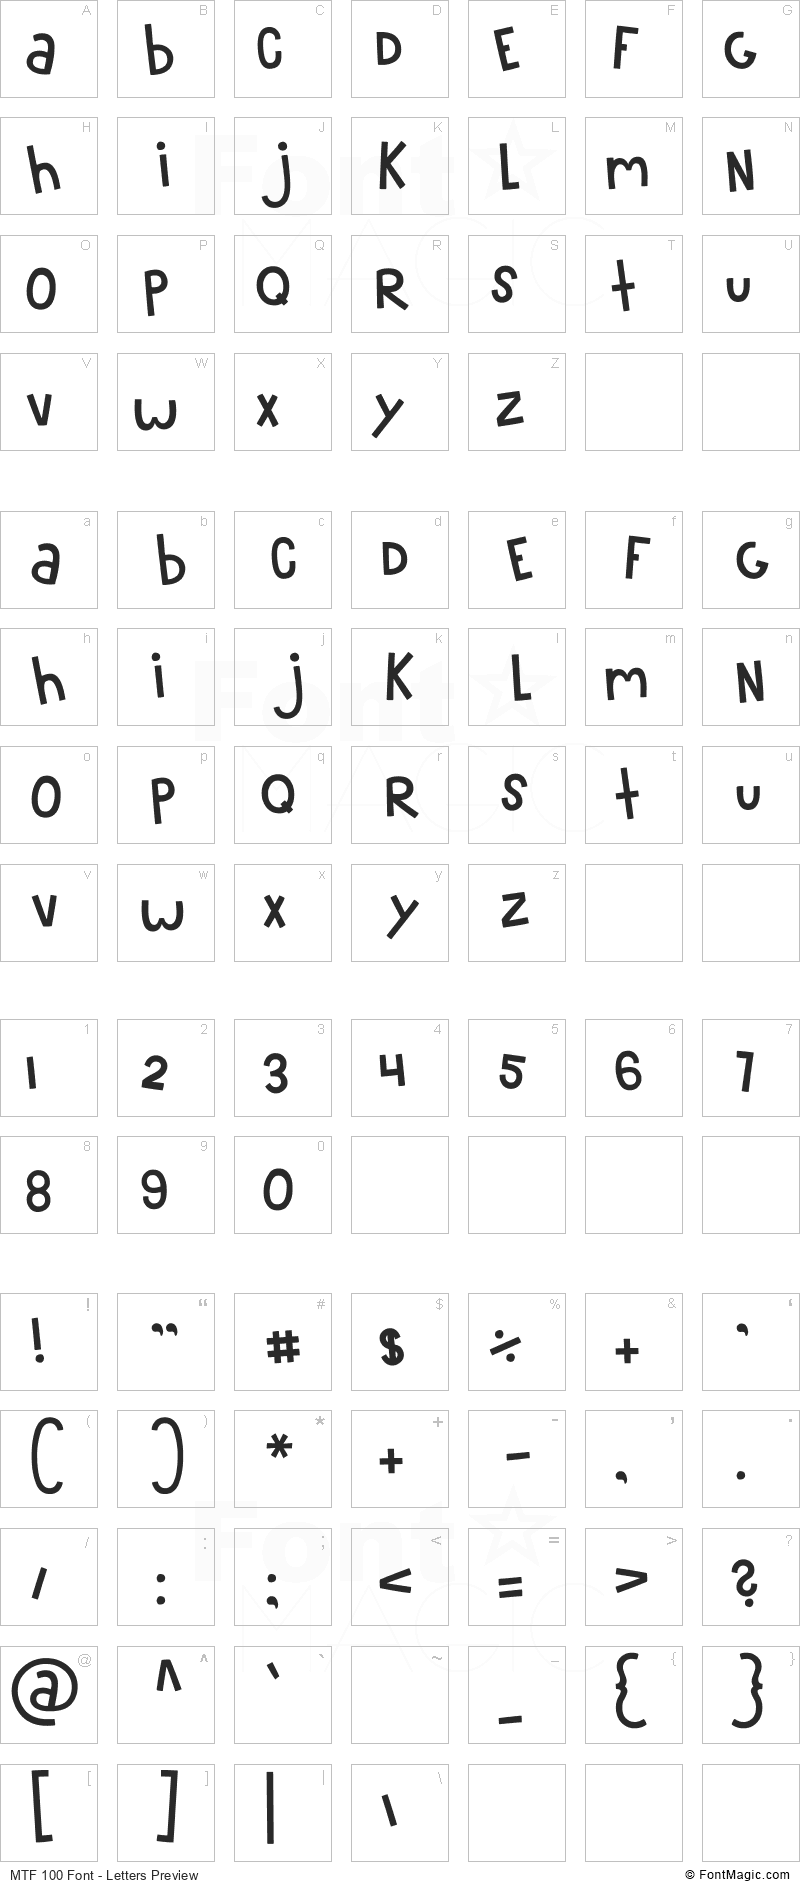 MTF 100 Font - All Latters Preview Chart